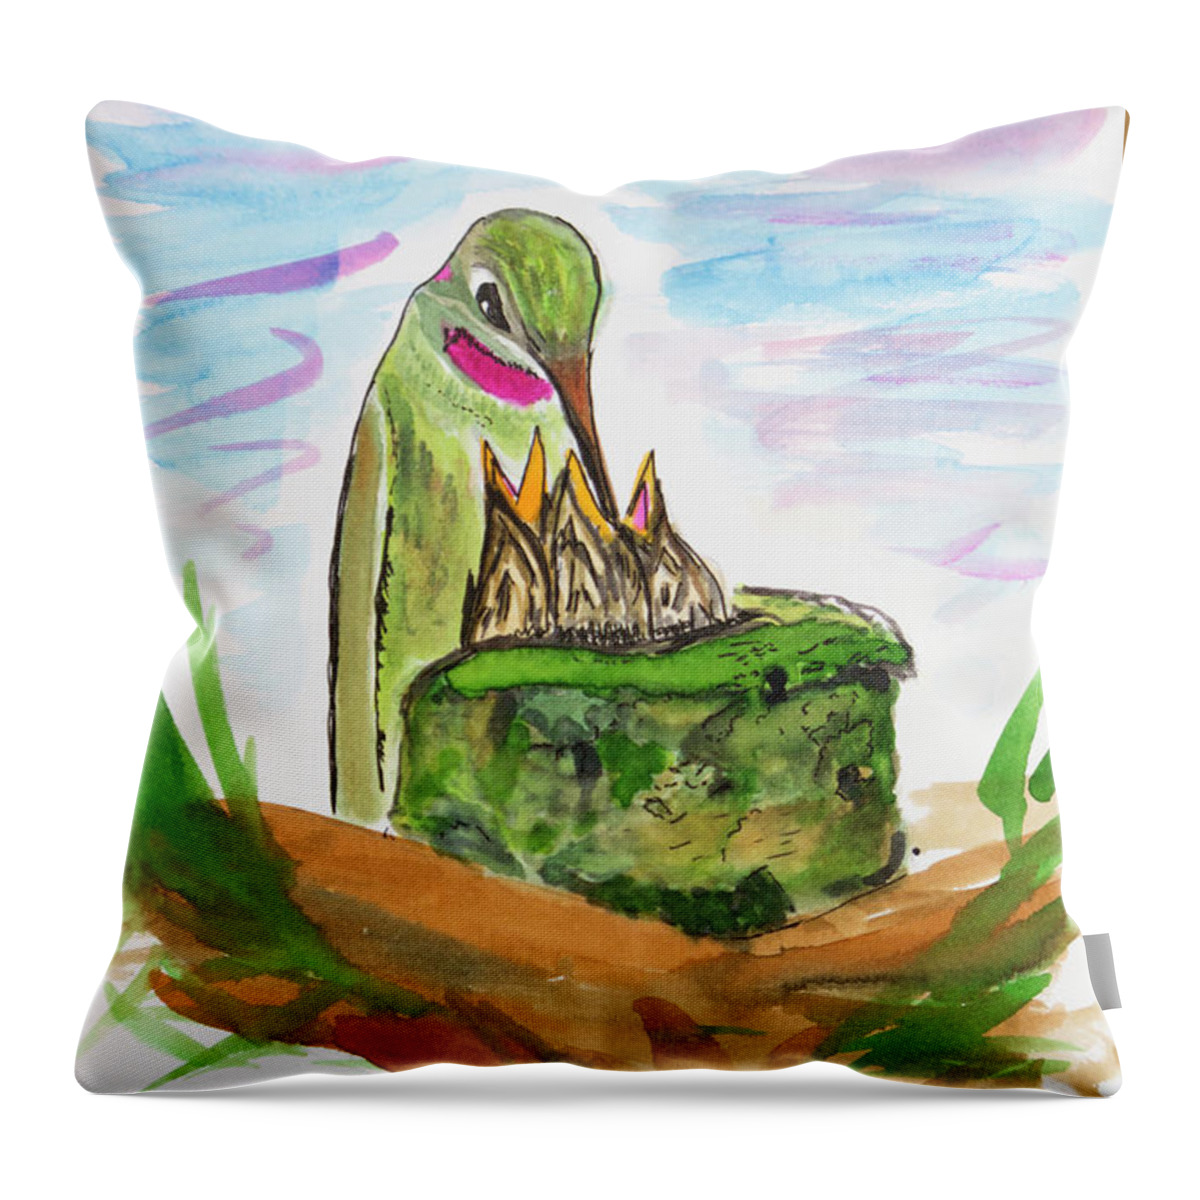 Hummingbird Throw Pillow featuring the painting Mama and Baby Hummingbirds by Her Arts Desire